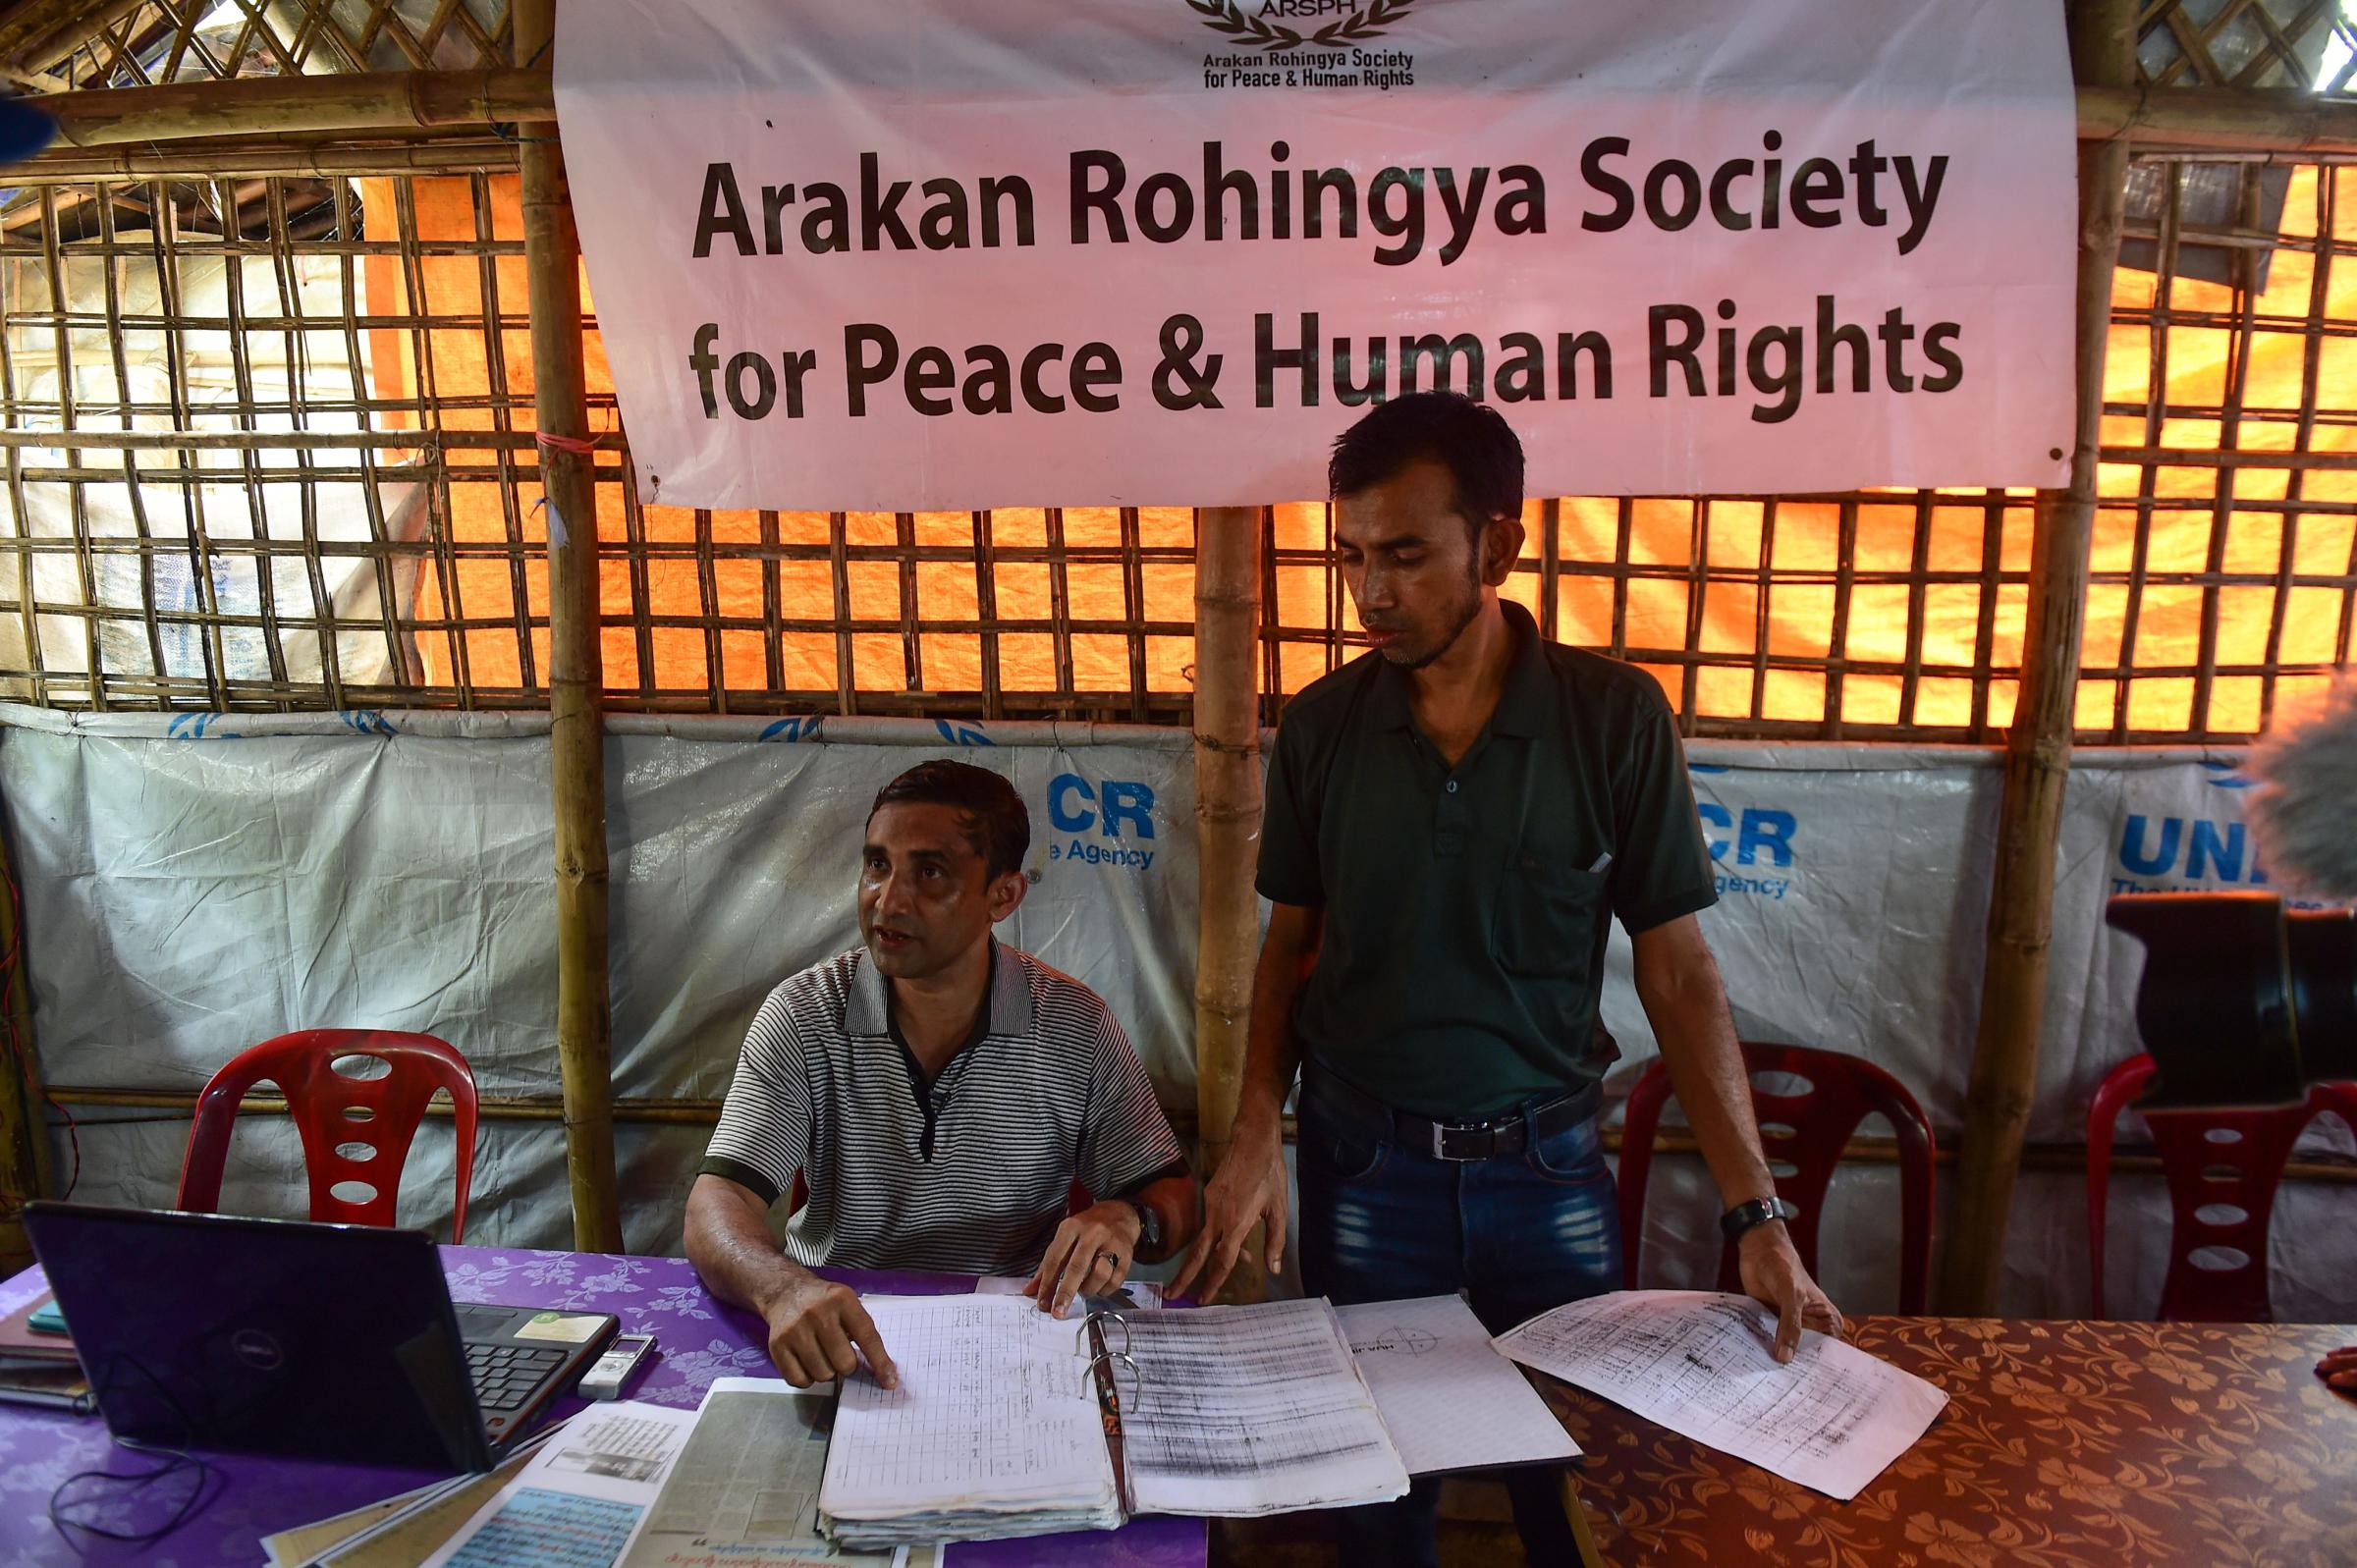 Mohibullah, a Rohingya refugee activist, and a volunteer with data collected from Rohingya refugees of alleged abuses by Myanmar soldiers